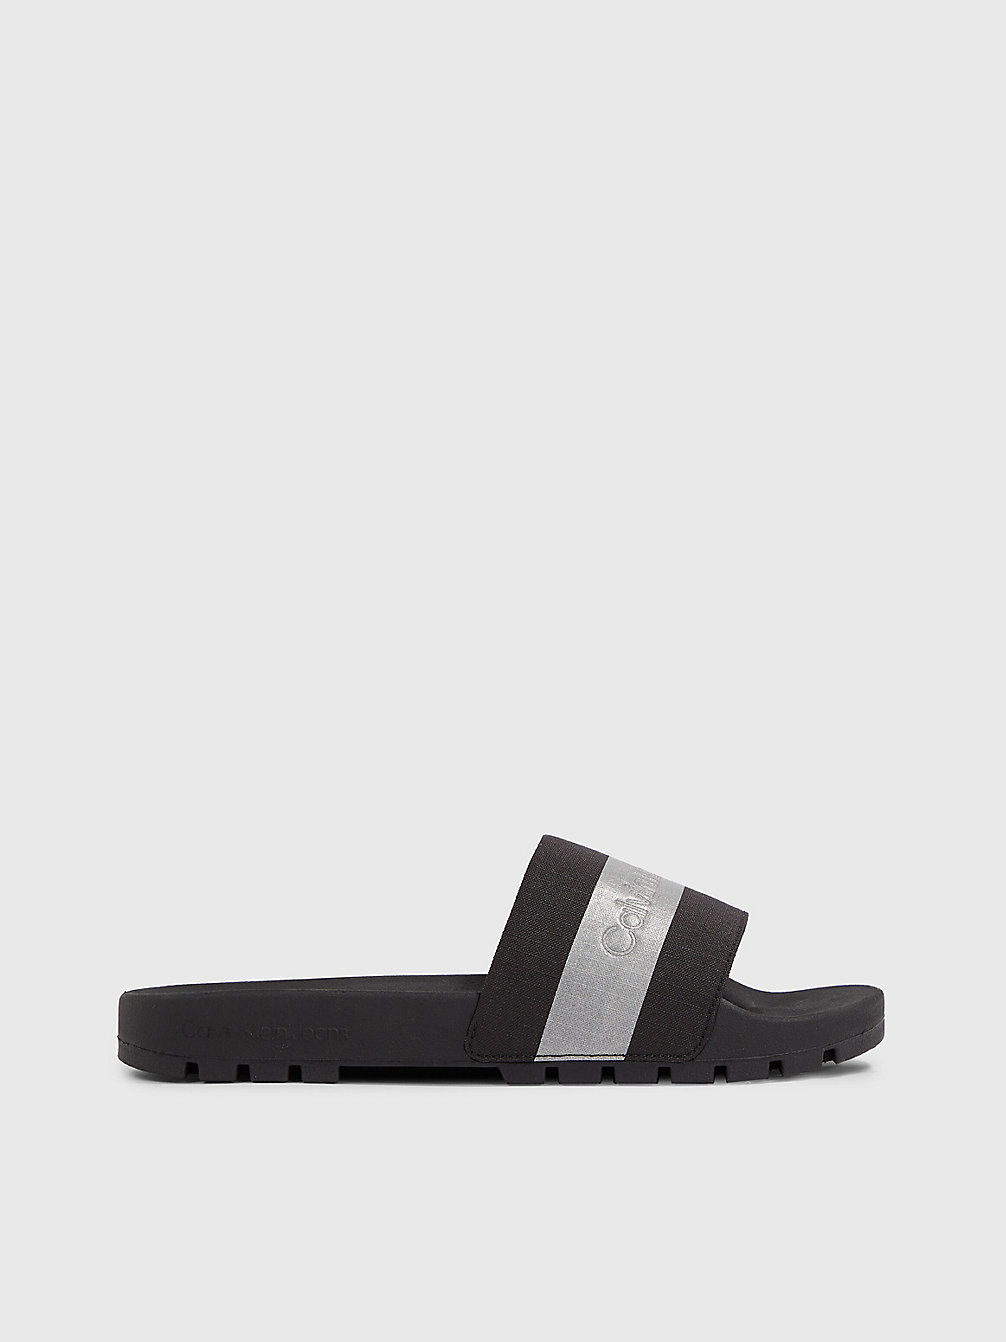 BLACK/REFLECTIVE TAPE Recycled Sliders undefined men Calvin Klein